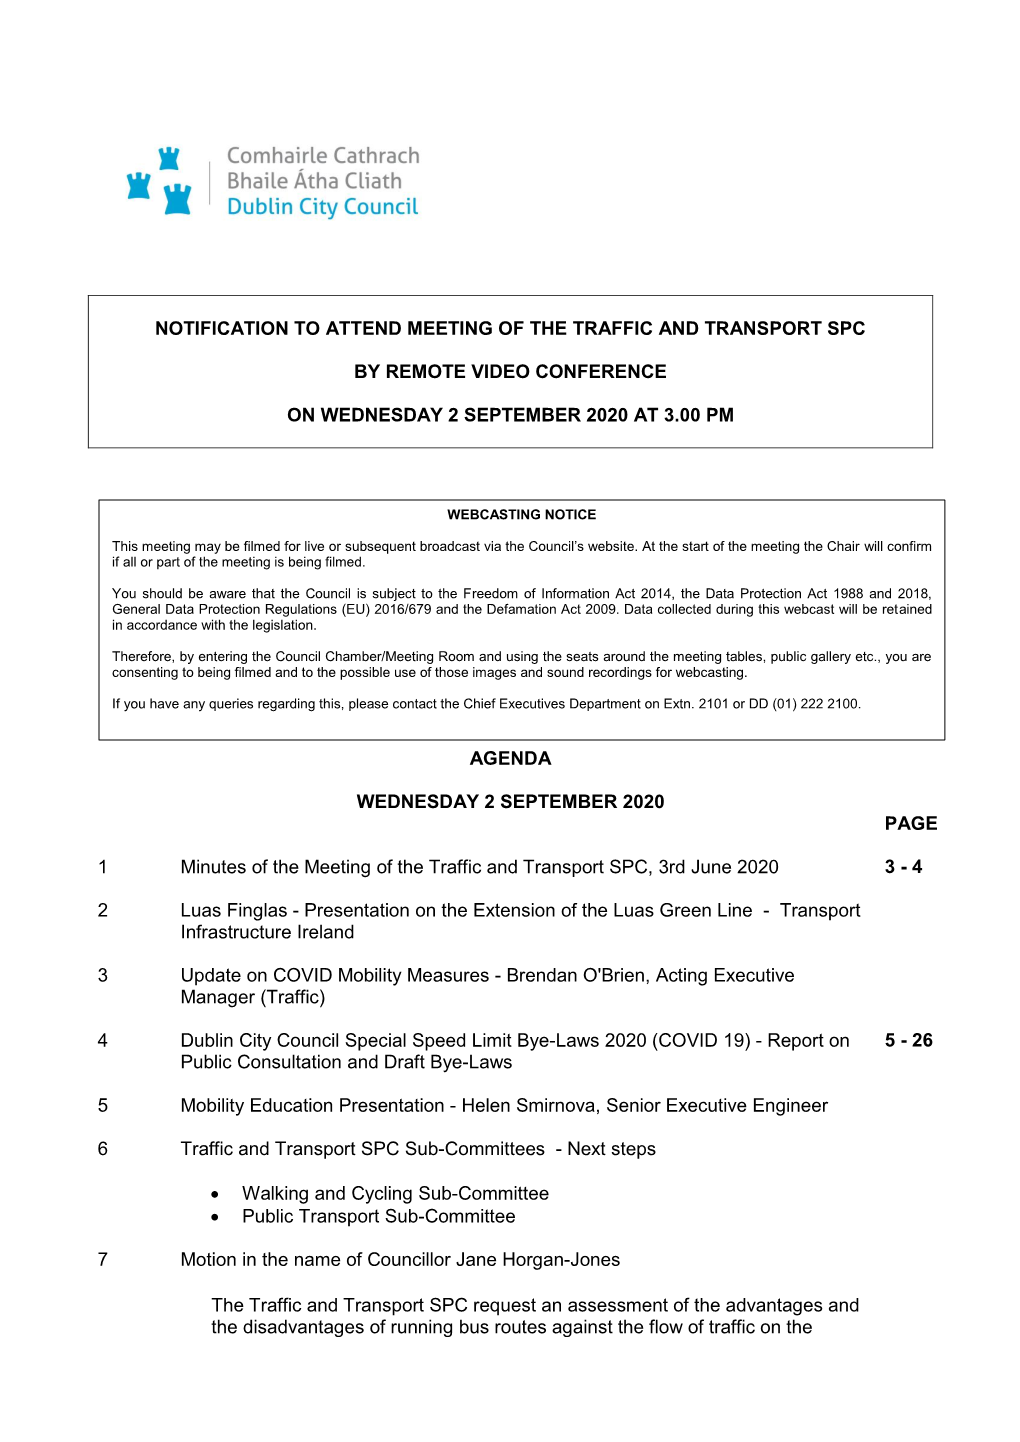 (Public Pack)Agenda Document for Traffic and Transport SPC, 02/09